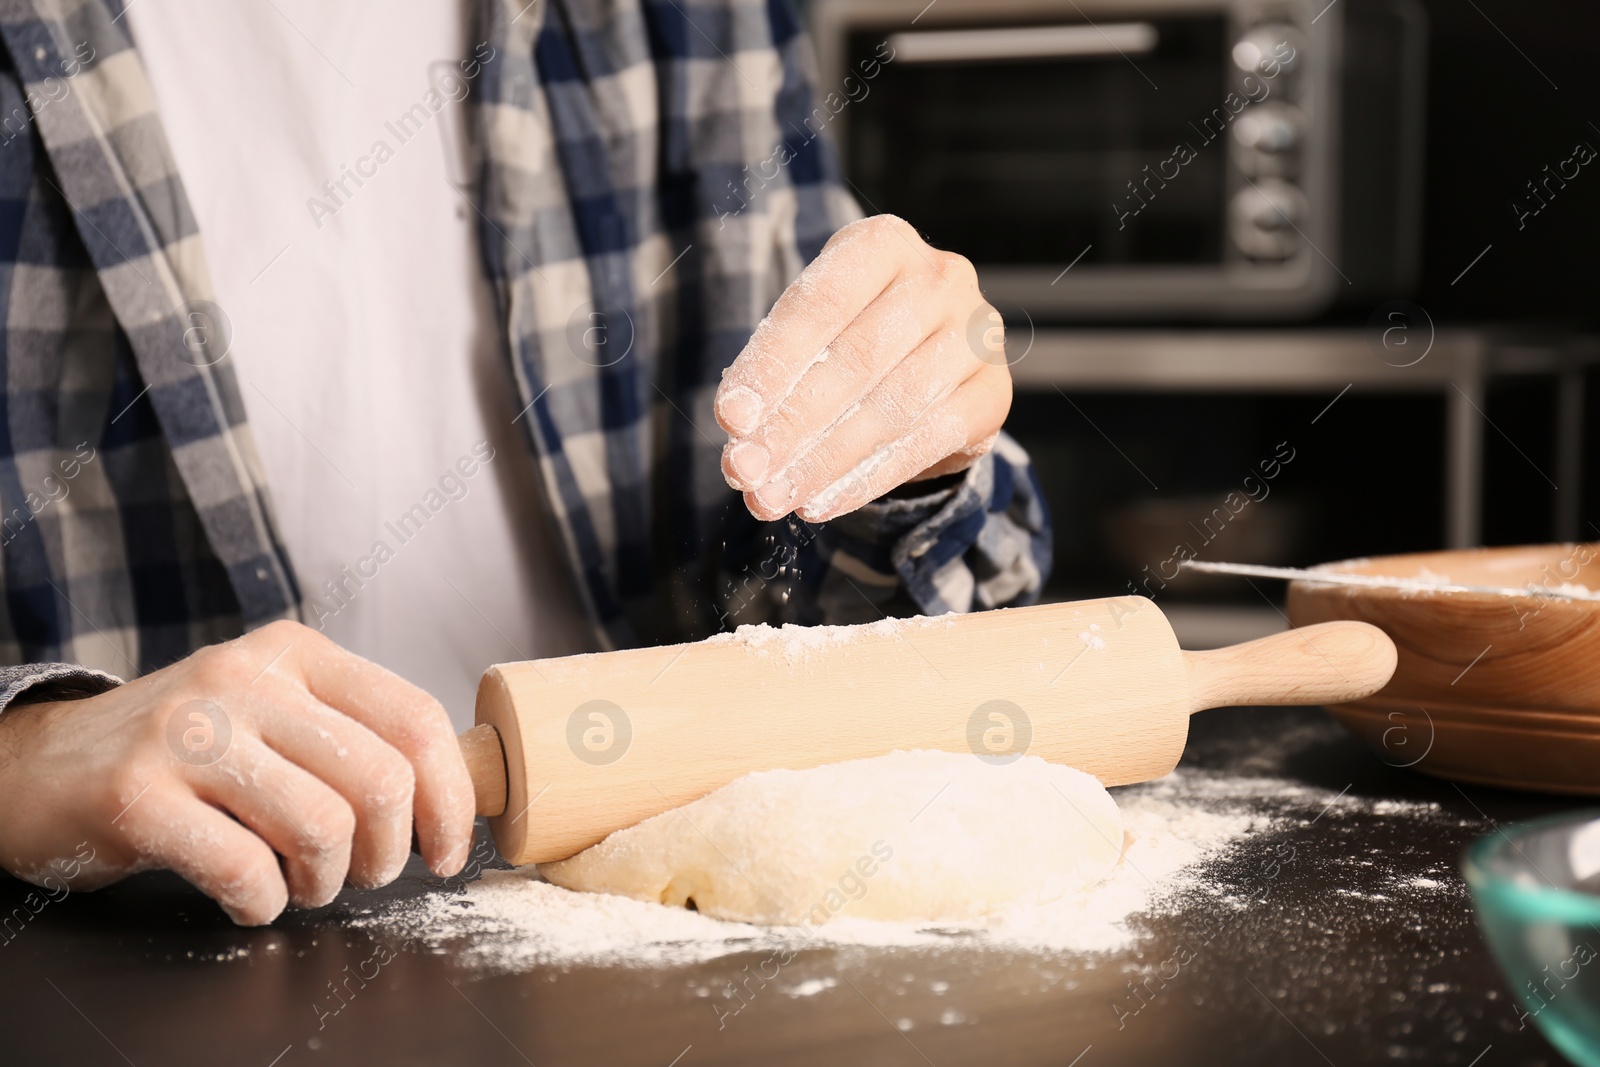 Photo of Man sprinkling flour while rolling dough on table in kitchen